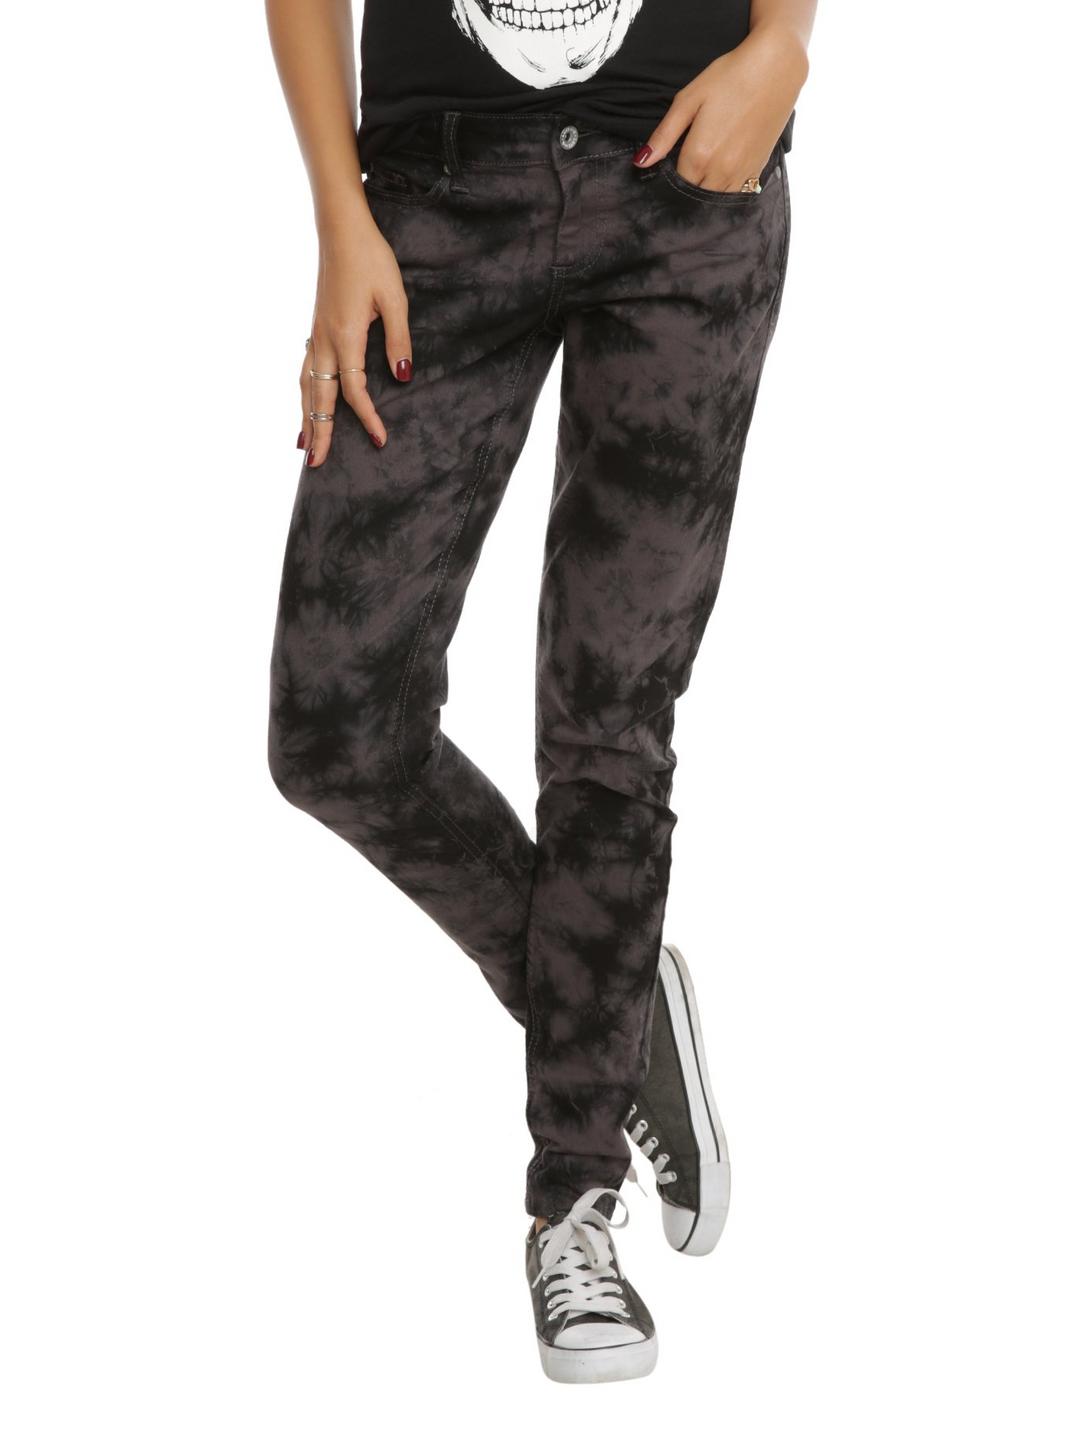 LOVEsick Grey Marble Twill Skinny Jeans, CHARCOAL, hi-res